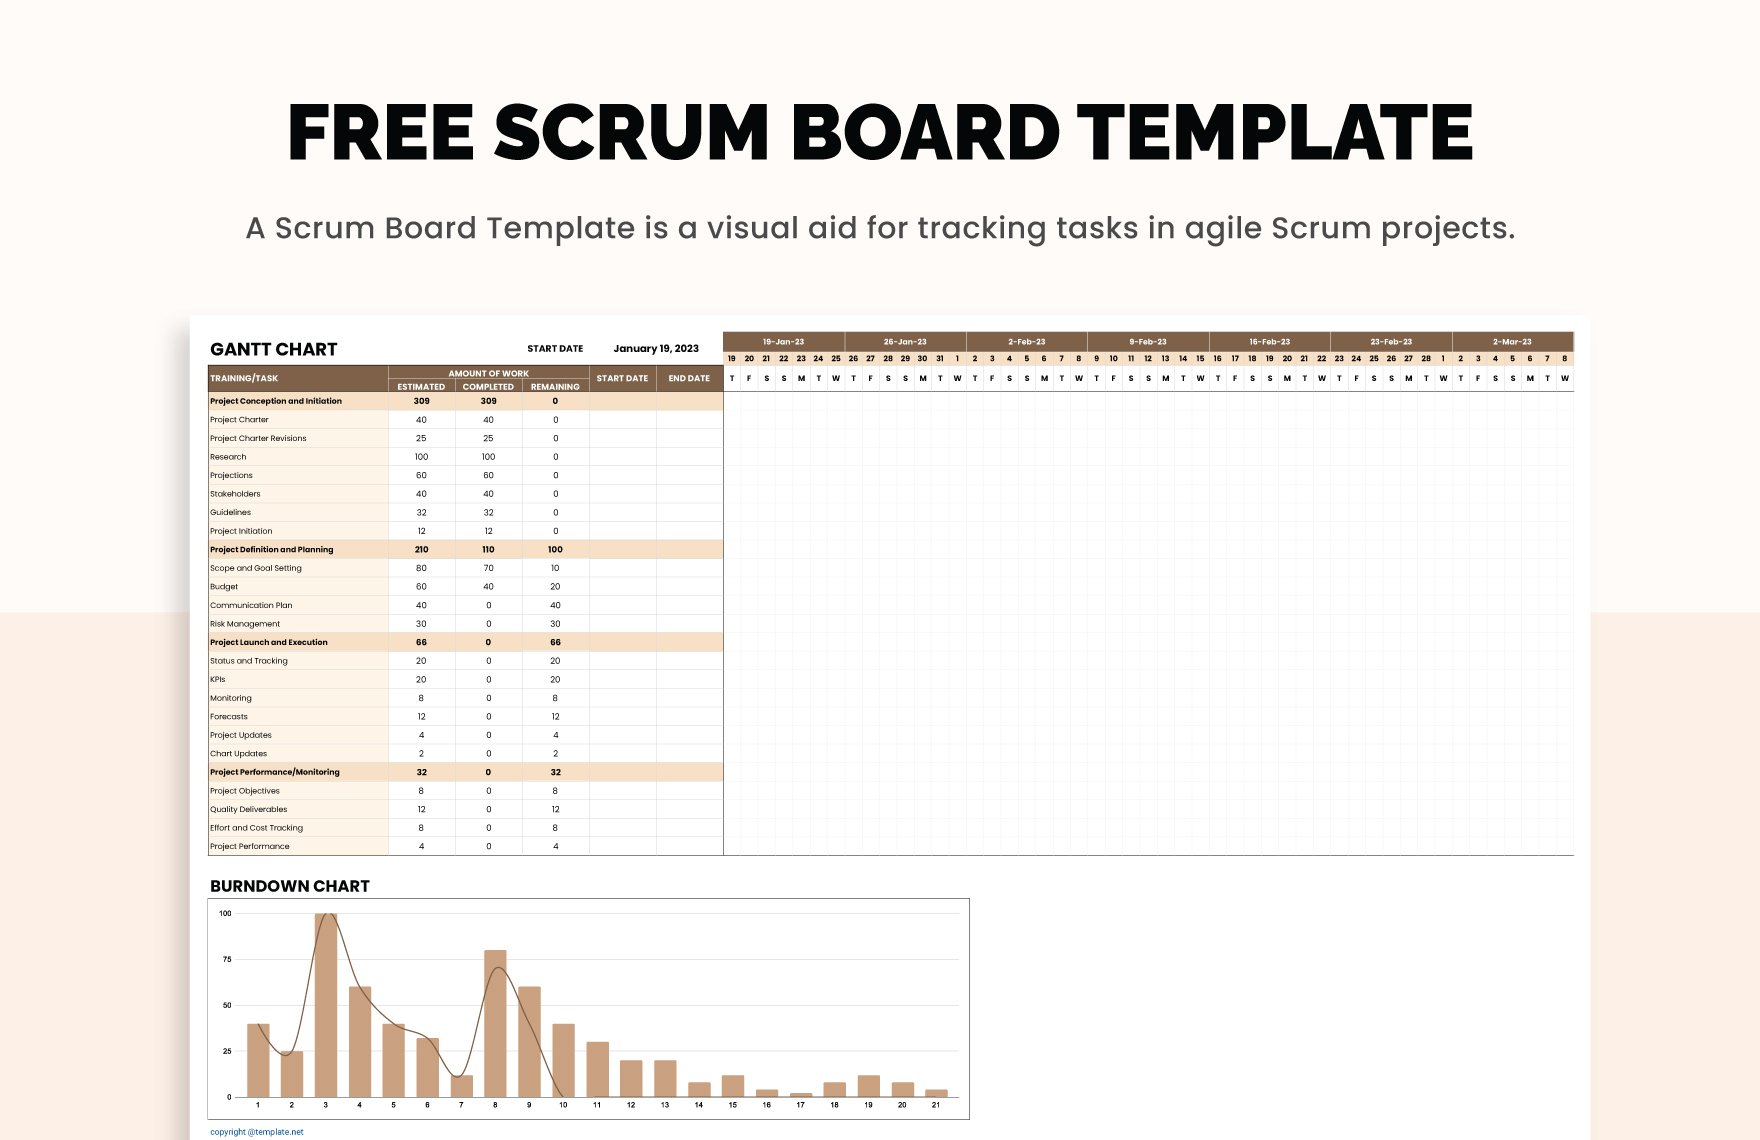 Free Scrum Board Template in Excel, Google Sheets